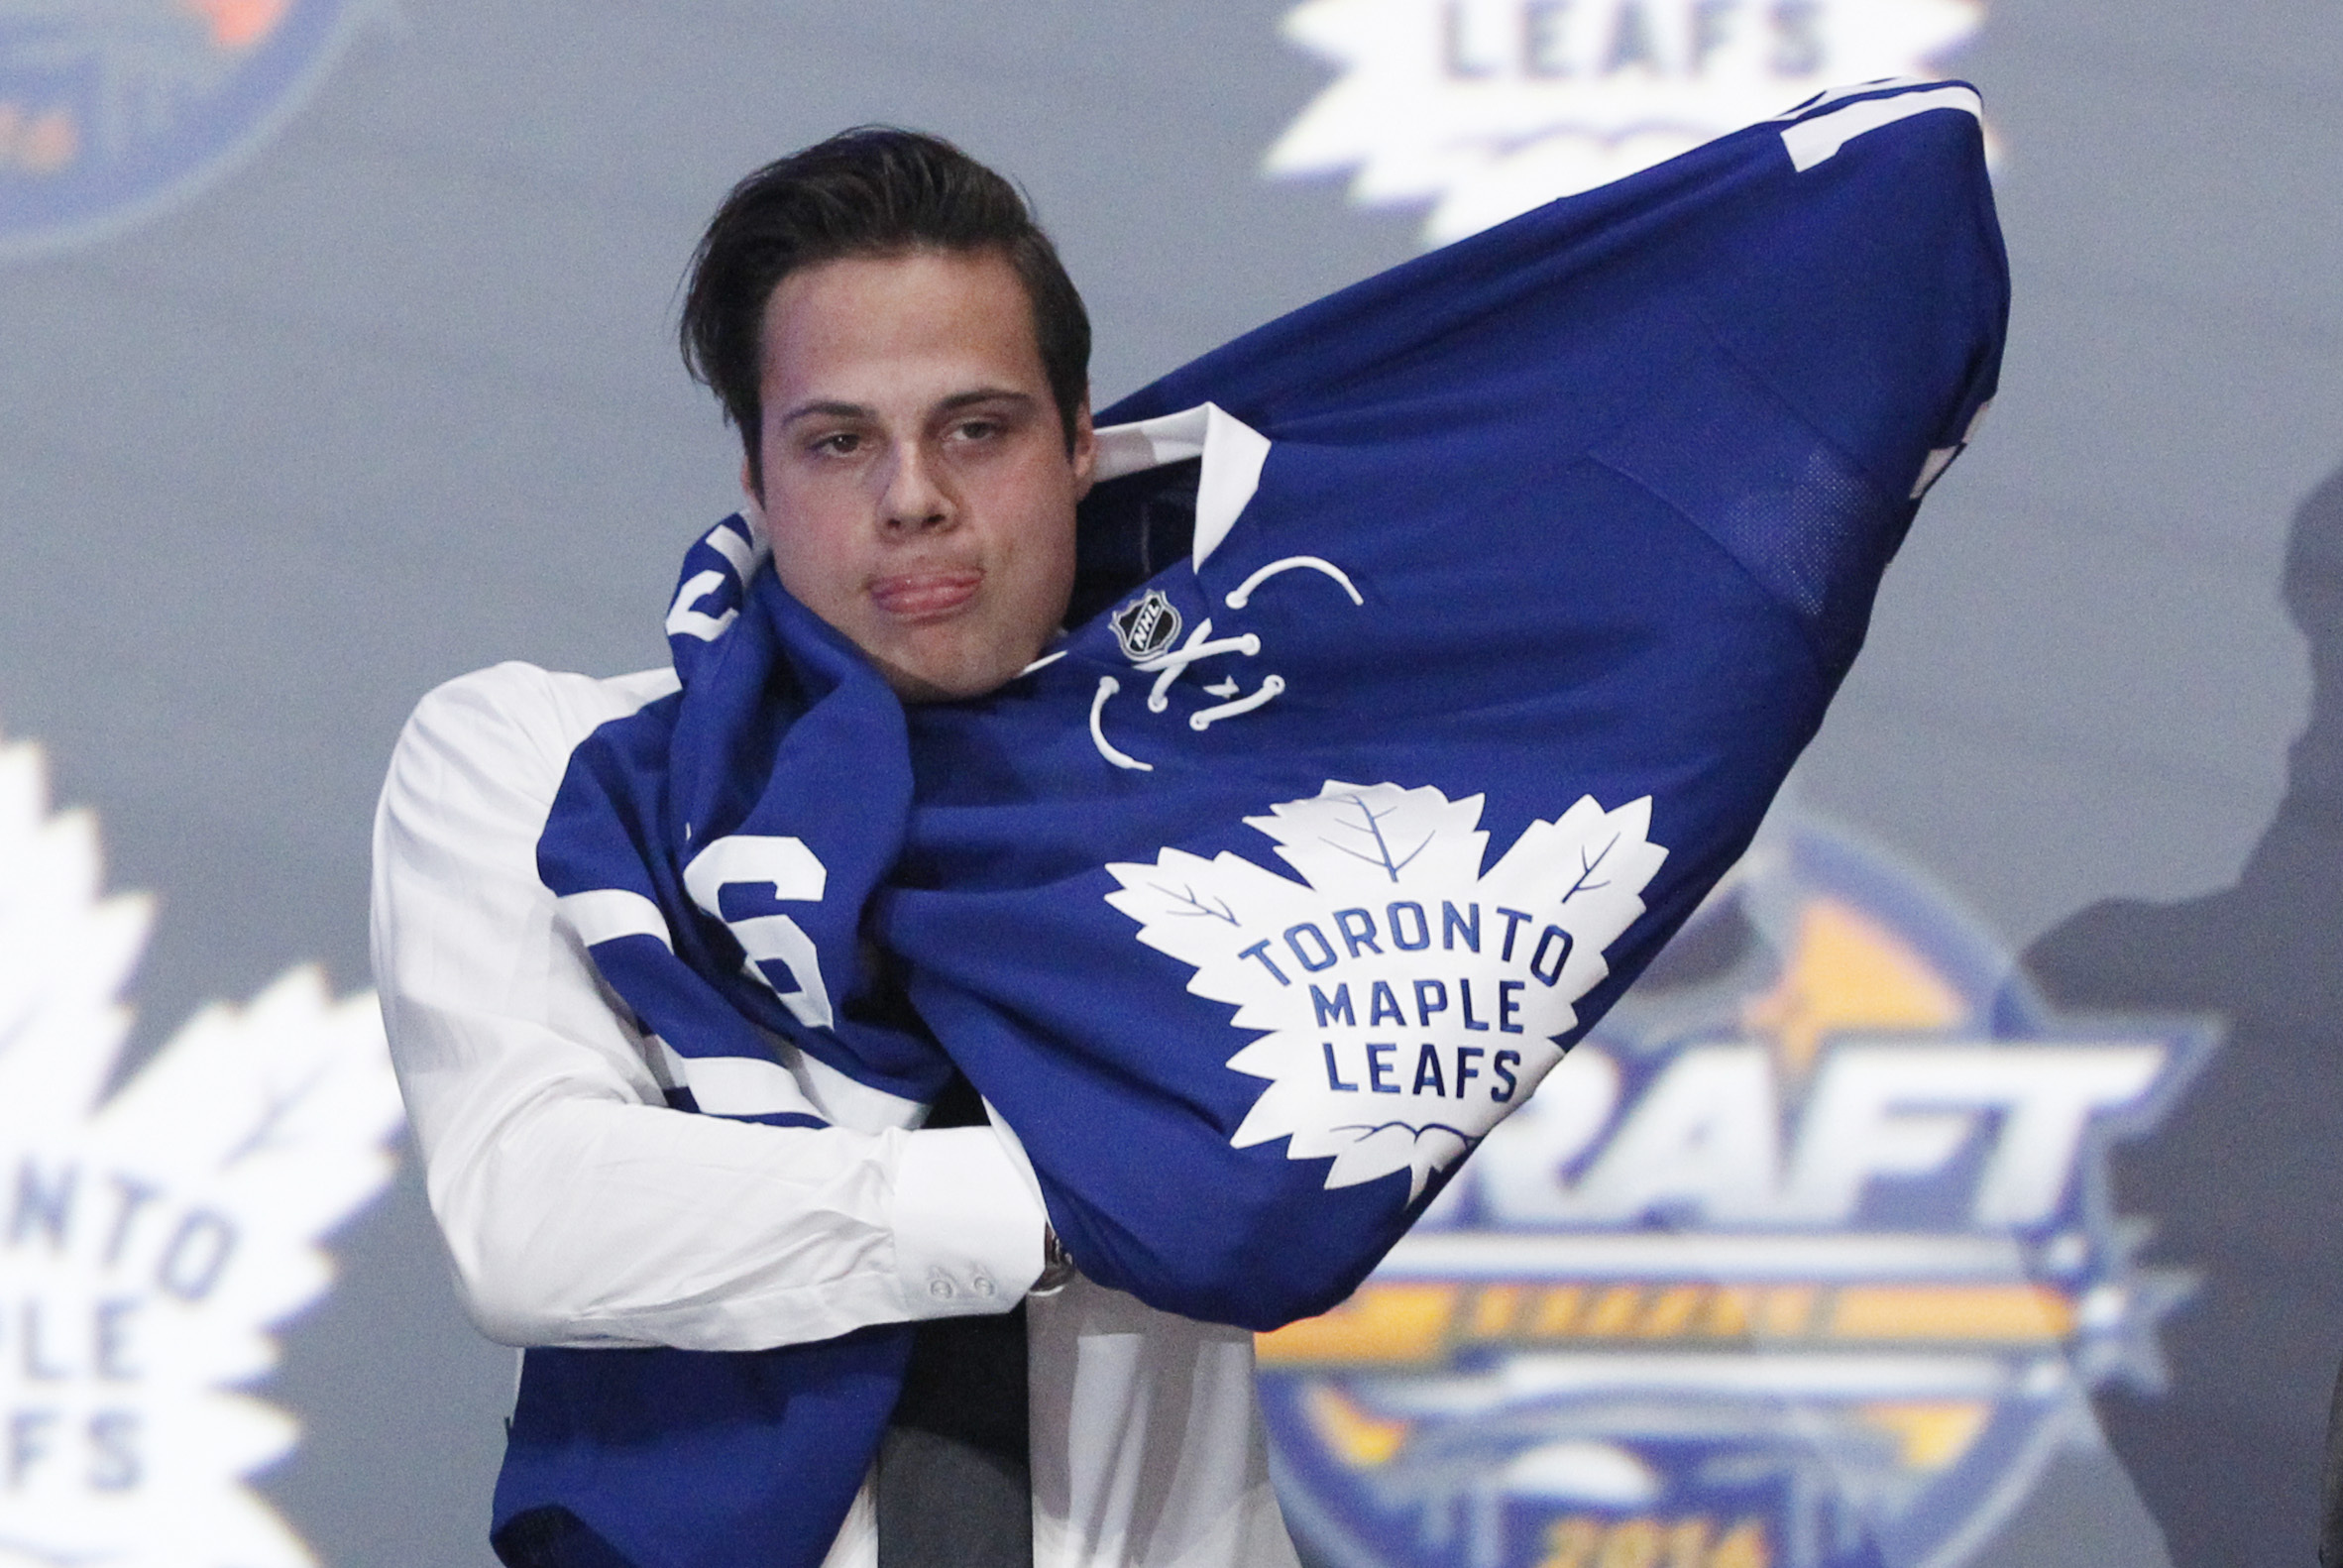 Leafs select Auston Matthews with No. 1 pick in NHL draft - The Globe and  Mail